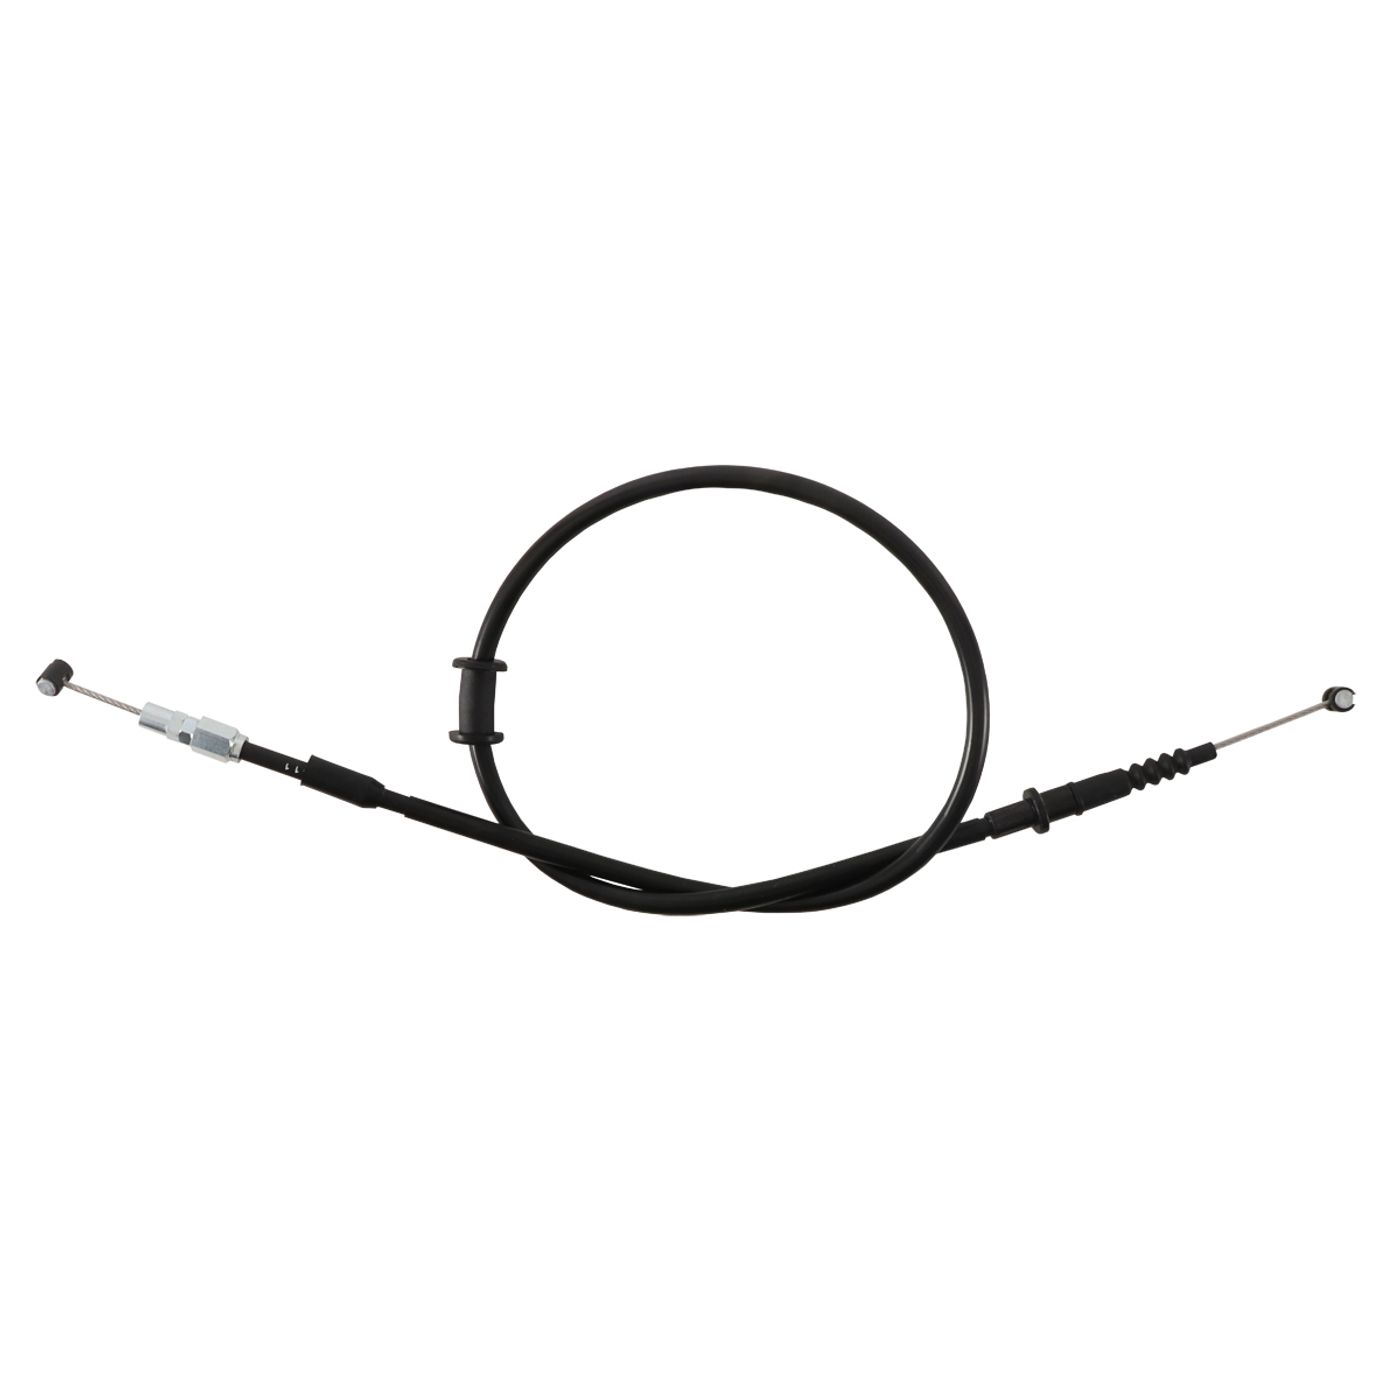 Wrp Clutch Cables - WRP452146 image